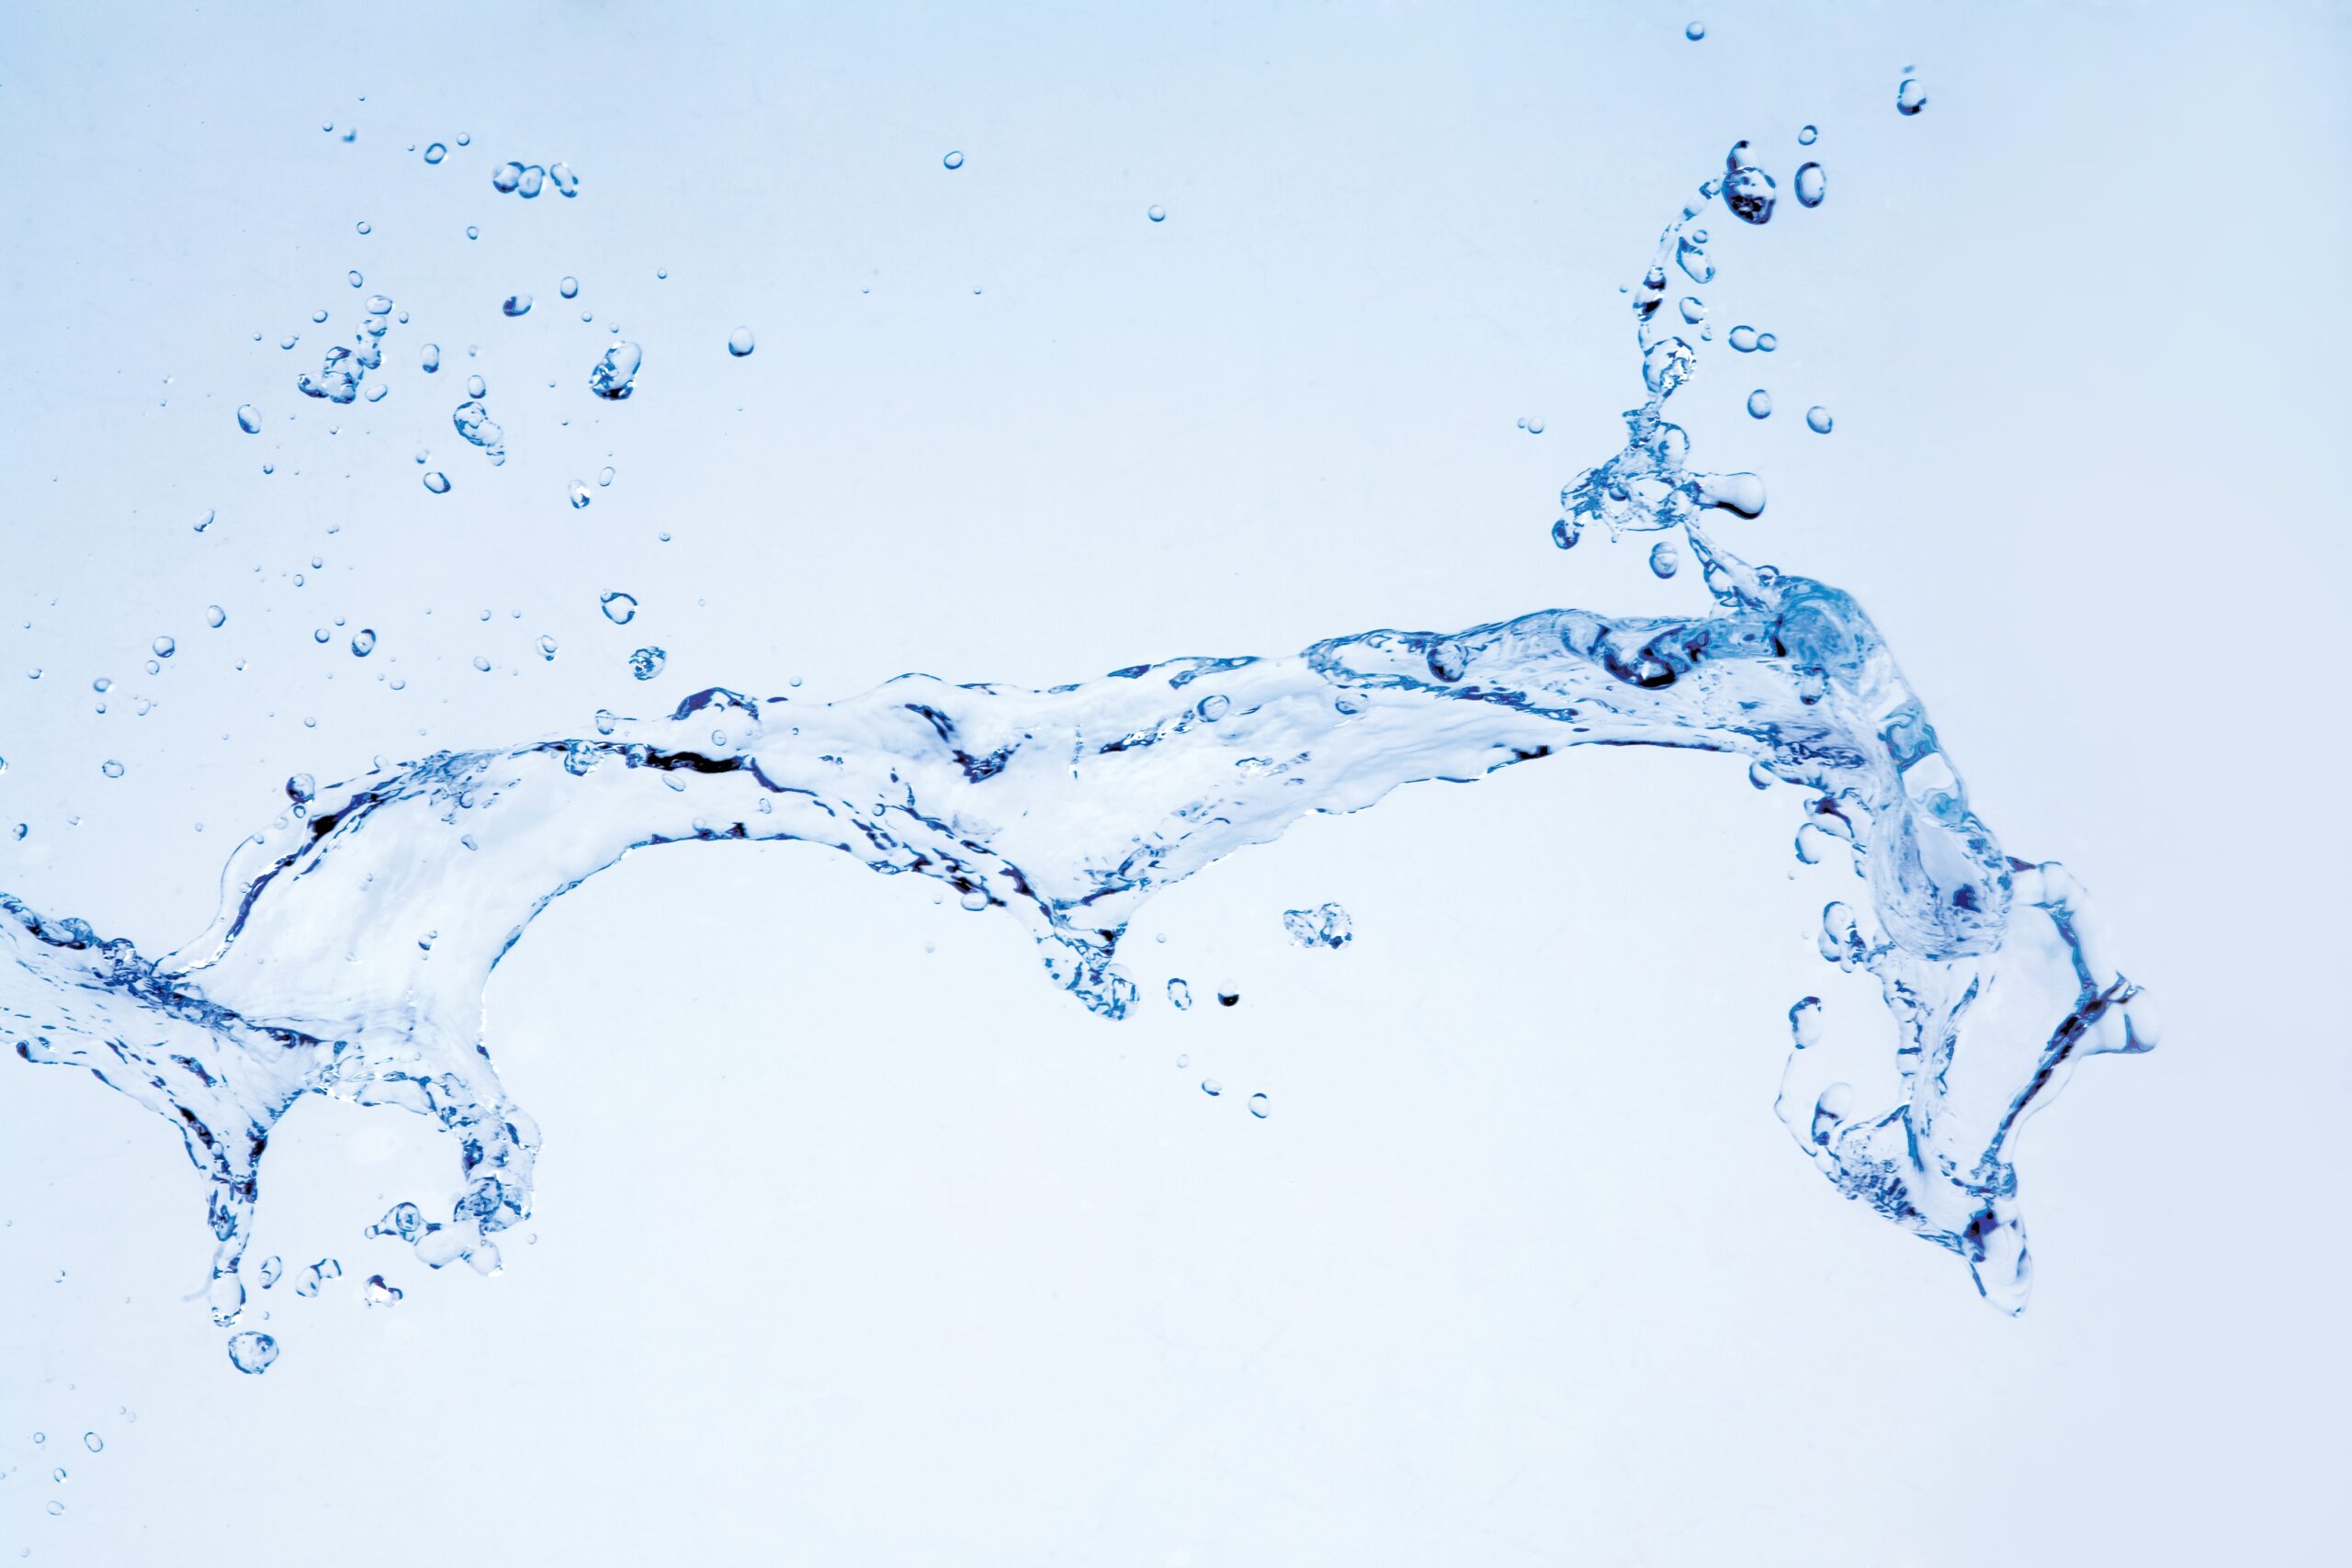 An image of water flowing